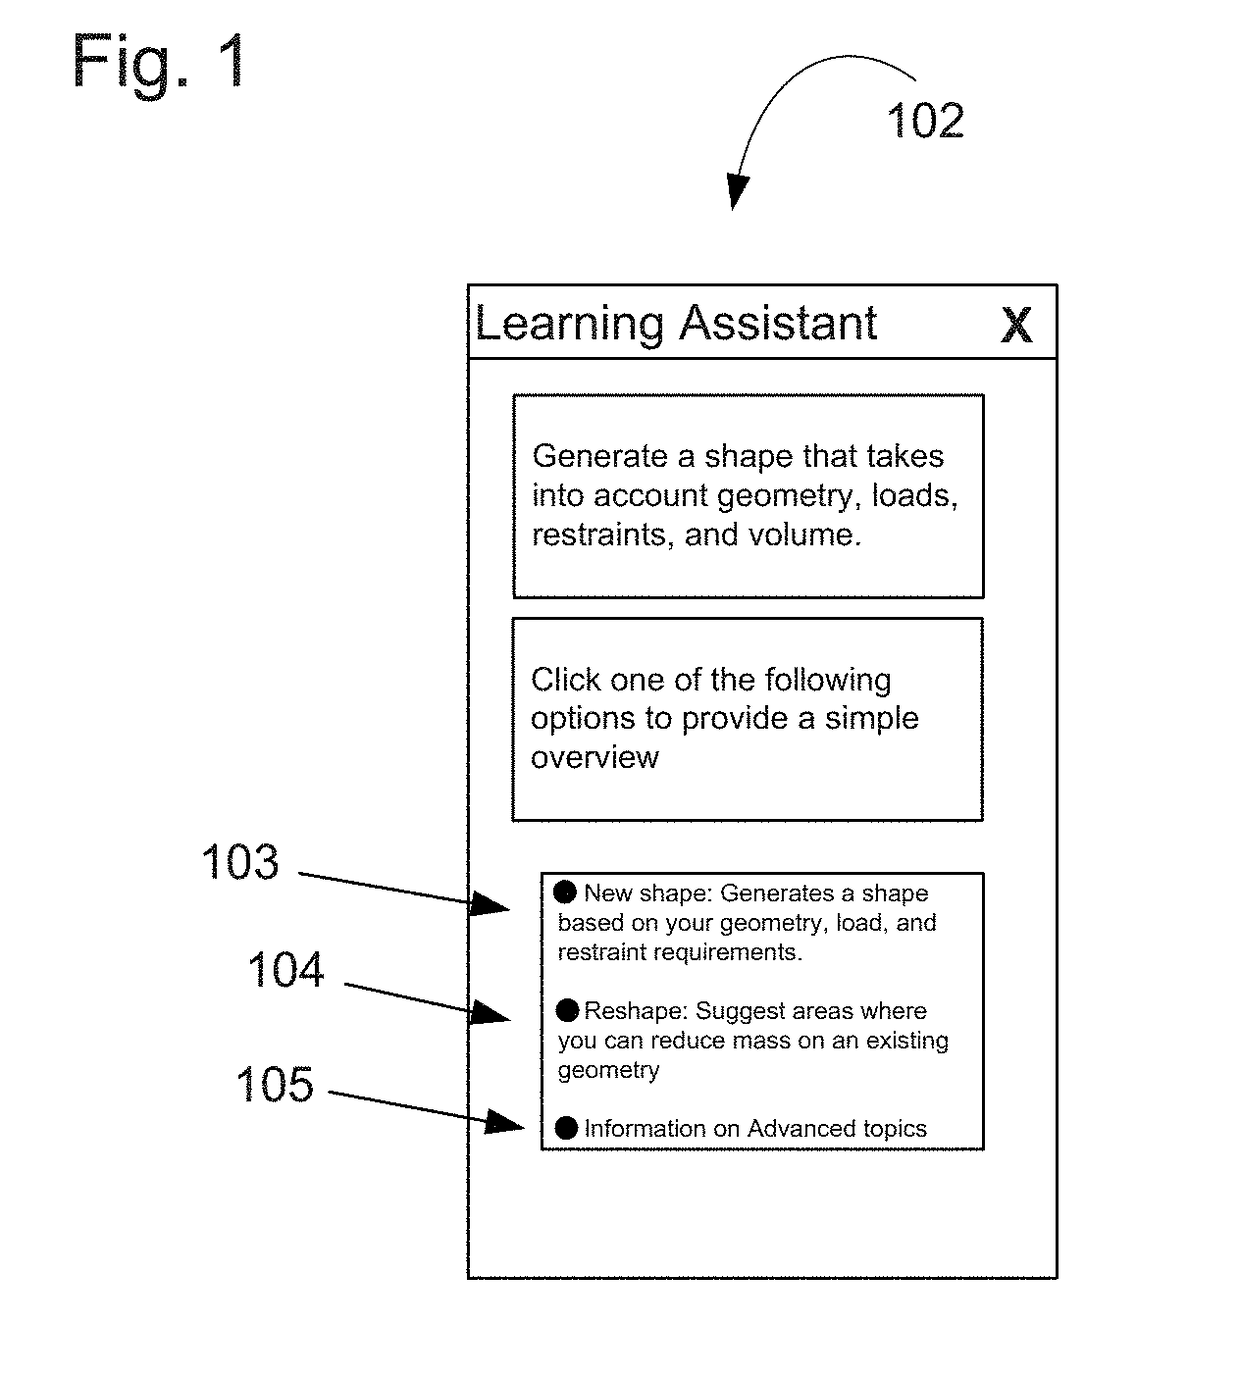 Computer-aided interactive learning